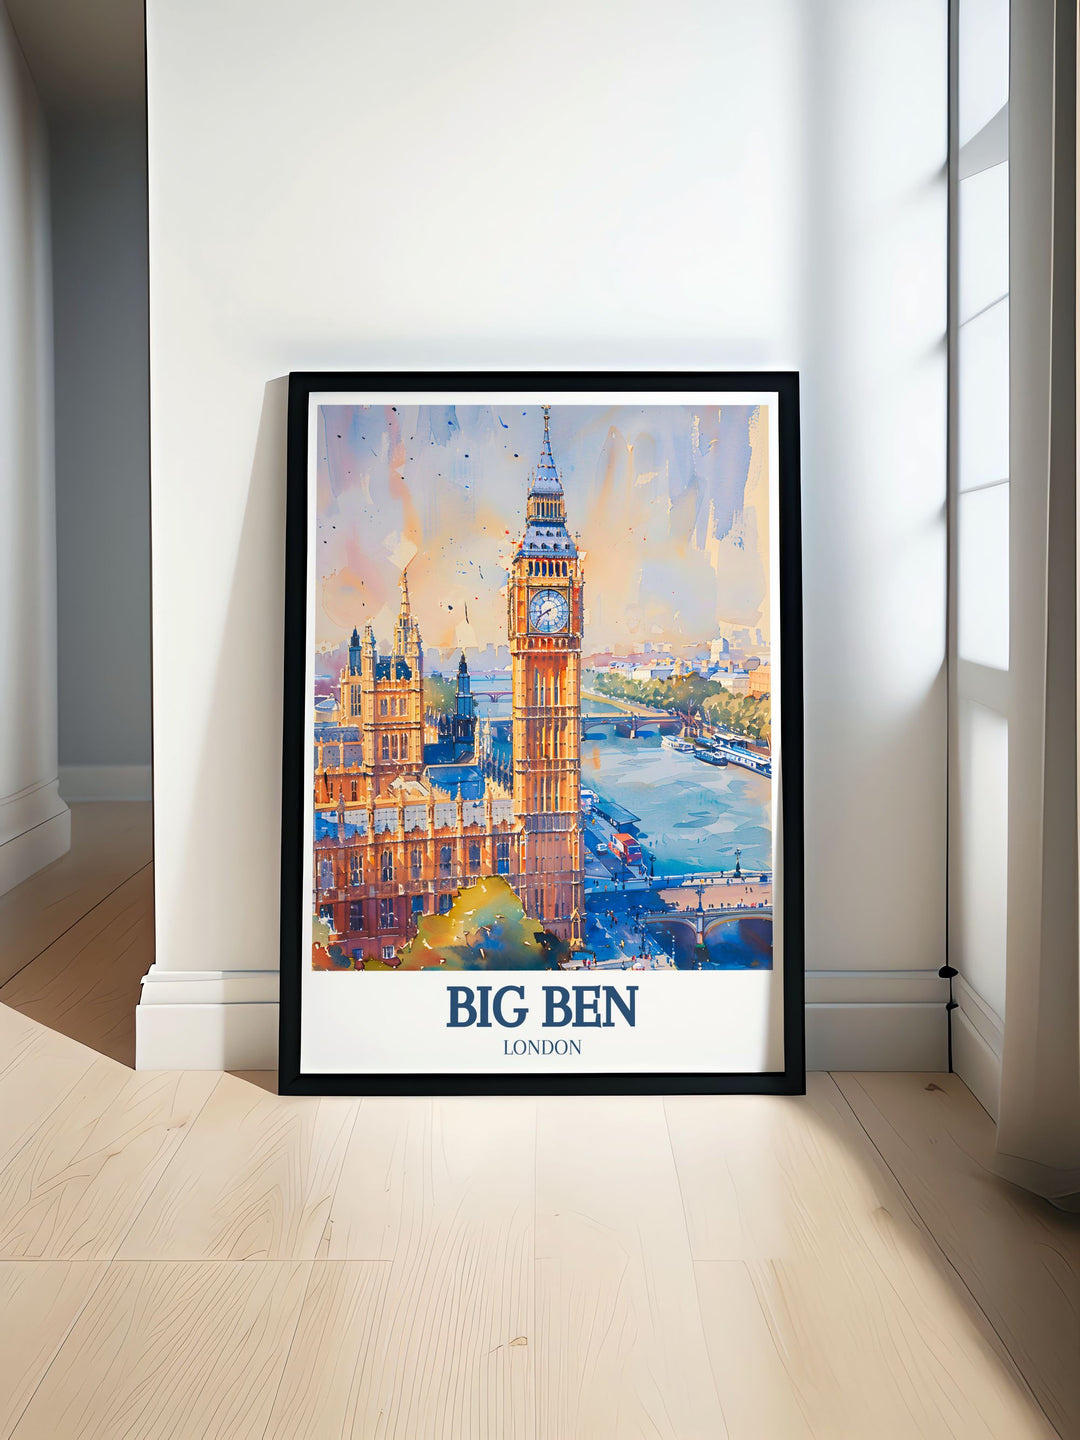 Captivating Big Ben poster featuring the iconic Houses of Parliament and the serene River Thames, showcasing Londons timeless beauty and charm. Perfect for adding a touch of historic elegance to your home decor.